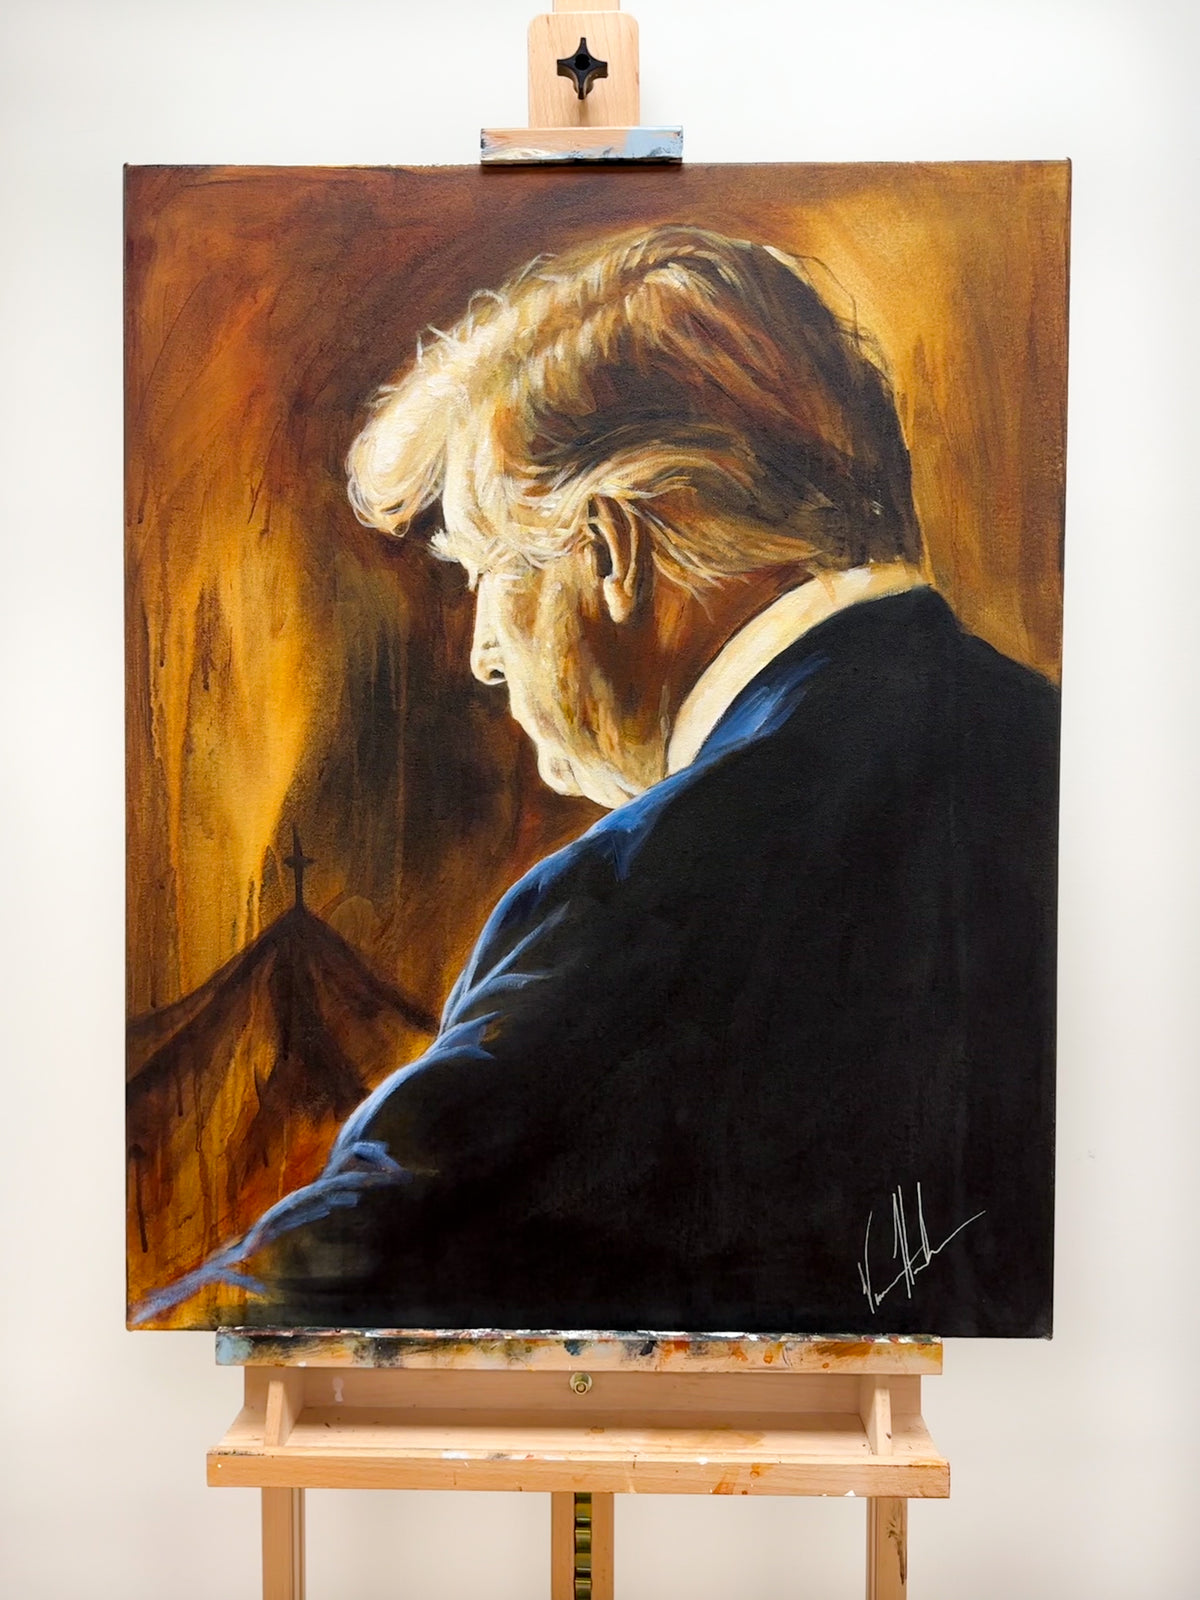 Prayers for Our President - 24”x30” Original Acrylic Painting